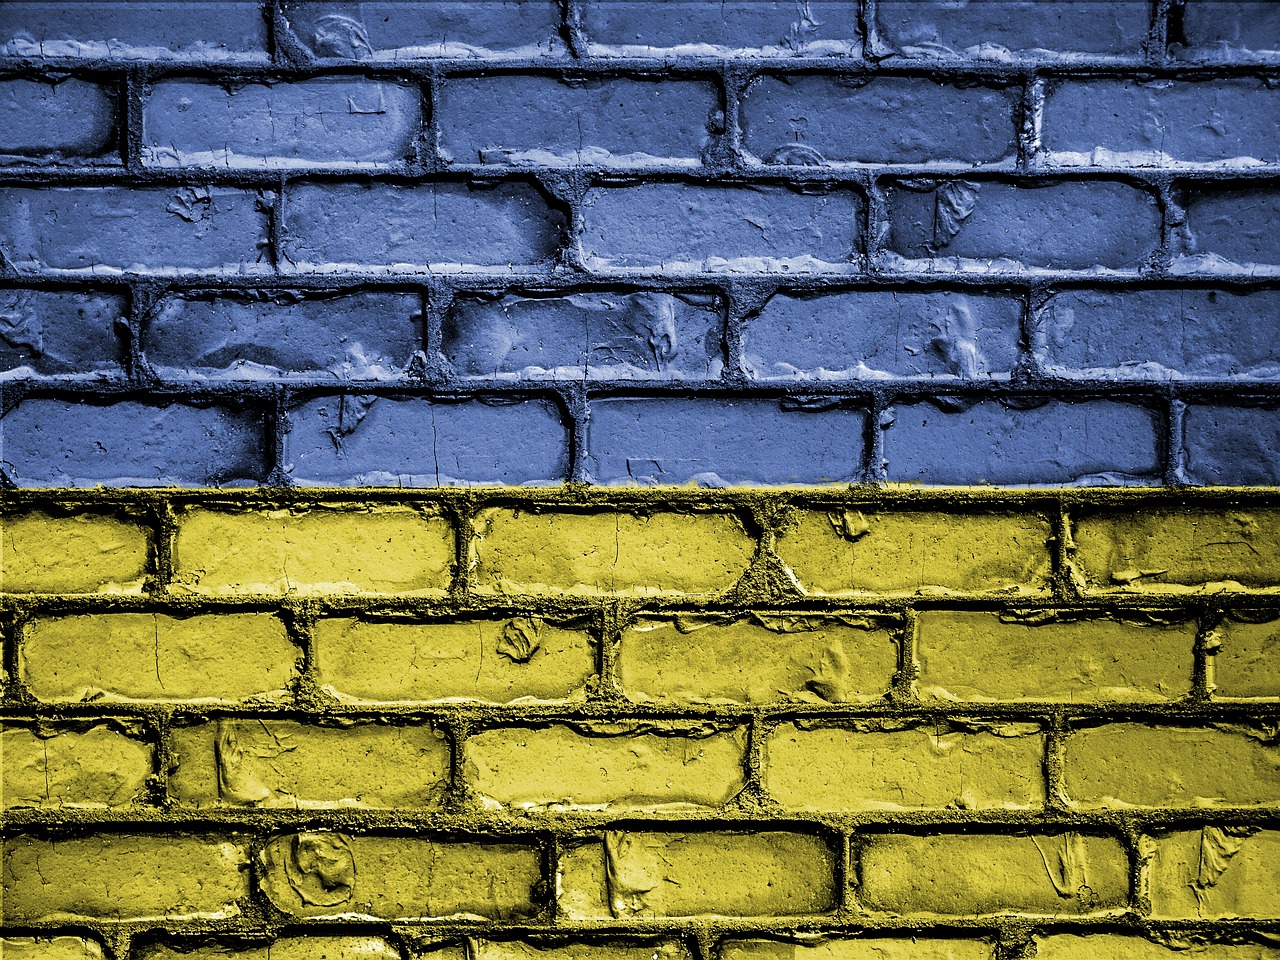 Ukraine High Ranking Officer Shares Thoughts On Crypto Assets, Says It’s Important